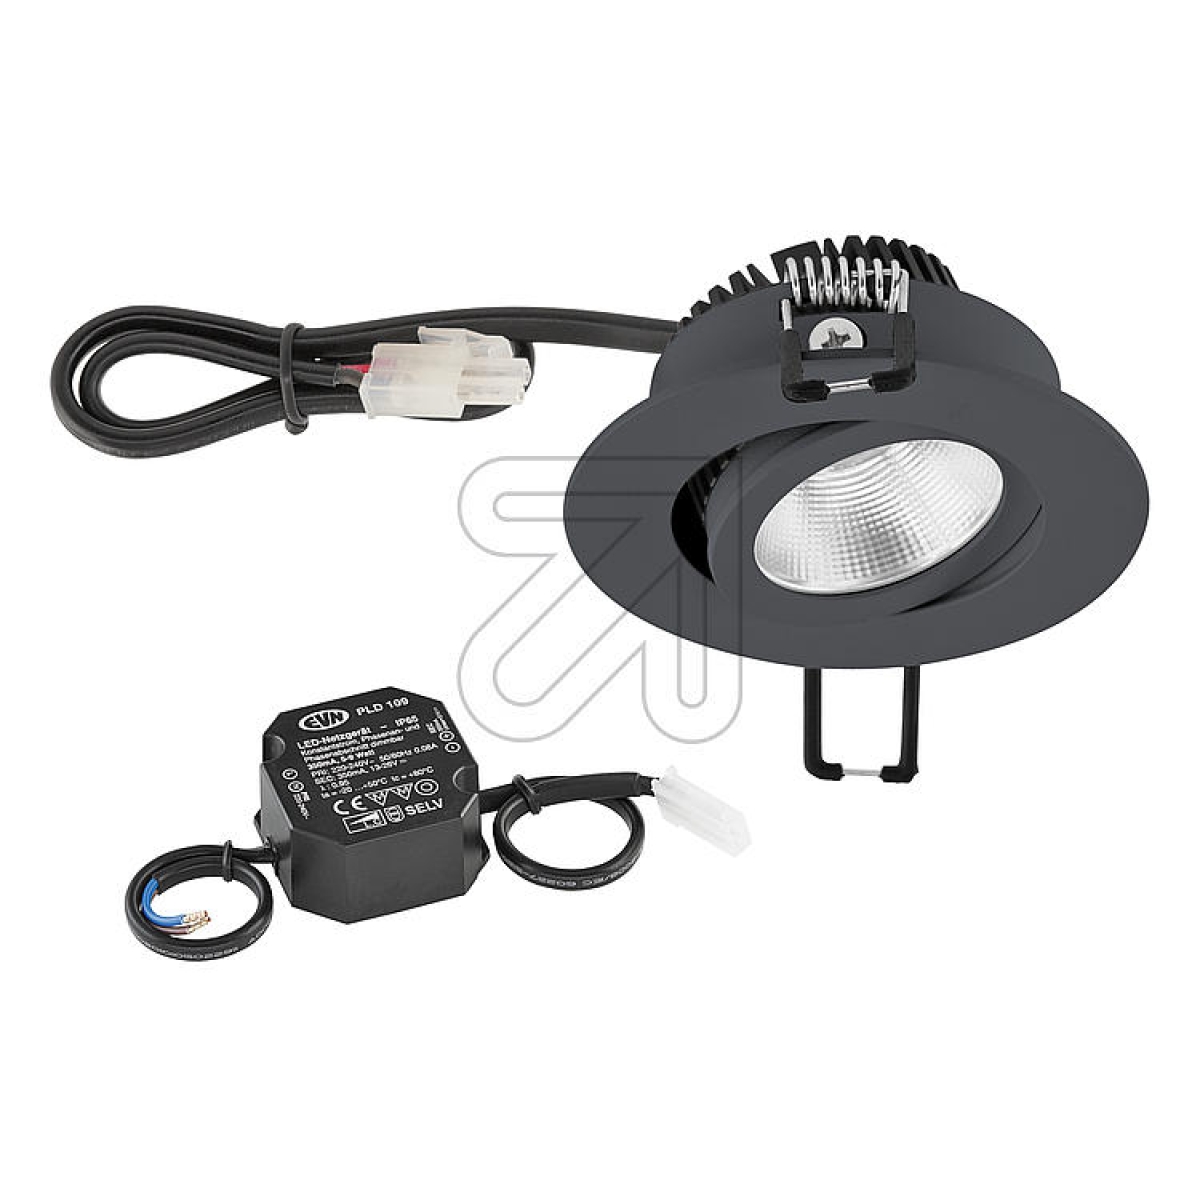 EVNLED recessed light anthracite 3000K 8.4W PC20N91602Article-No: 686525